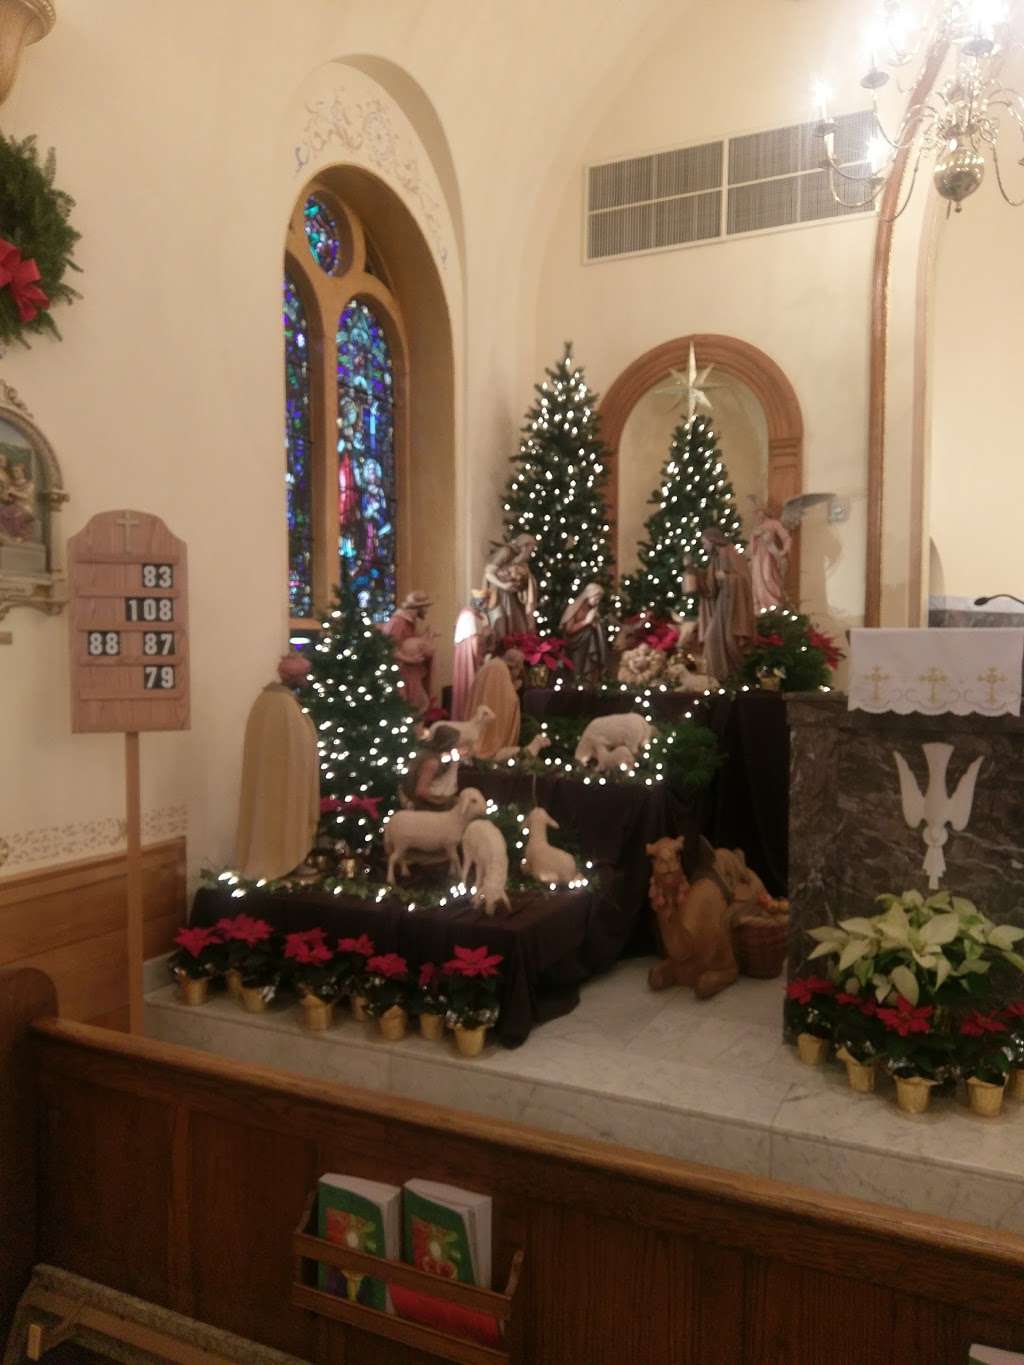 Our Lady of the Assumption Church | 35 Old Eagle School Rd, Wayne, PA 19087 | Phone: (610) 688-1178